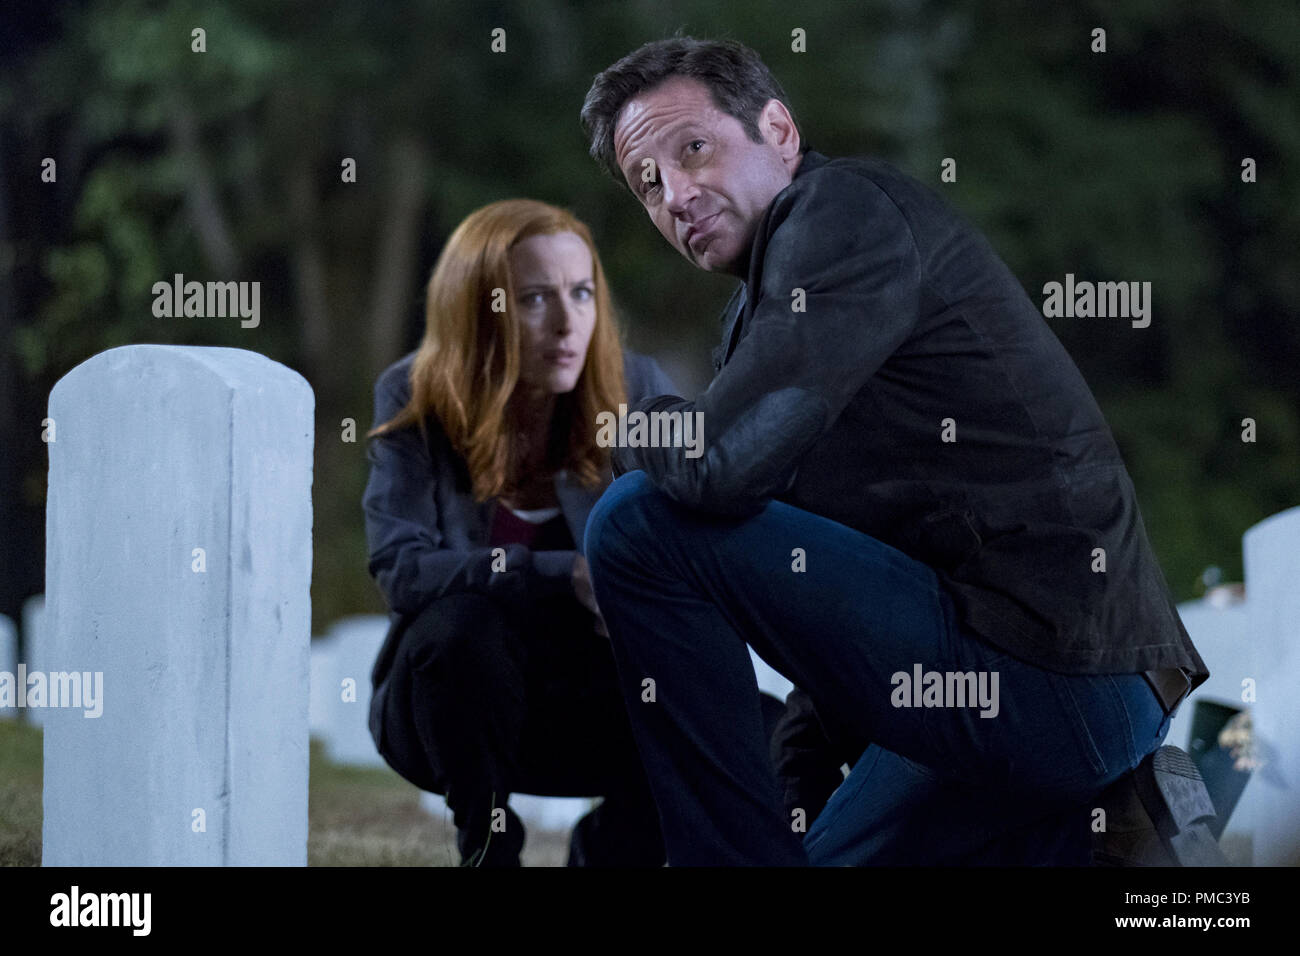 THE X-FILES:  L-R:  Gillian Anderson and David Duchovny in the 'This' episode of THE X-FILES on Fox. © 2018 Fox Broadcasting Co. Cr:  Robert Falconer/Fox Stock Photo